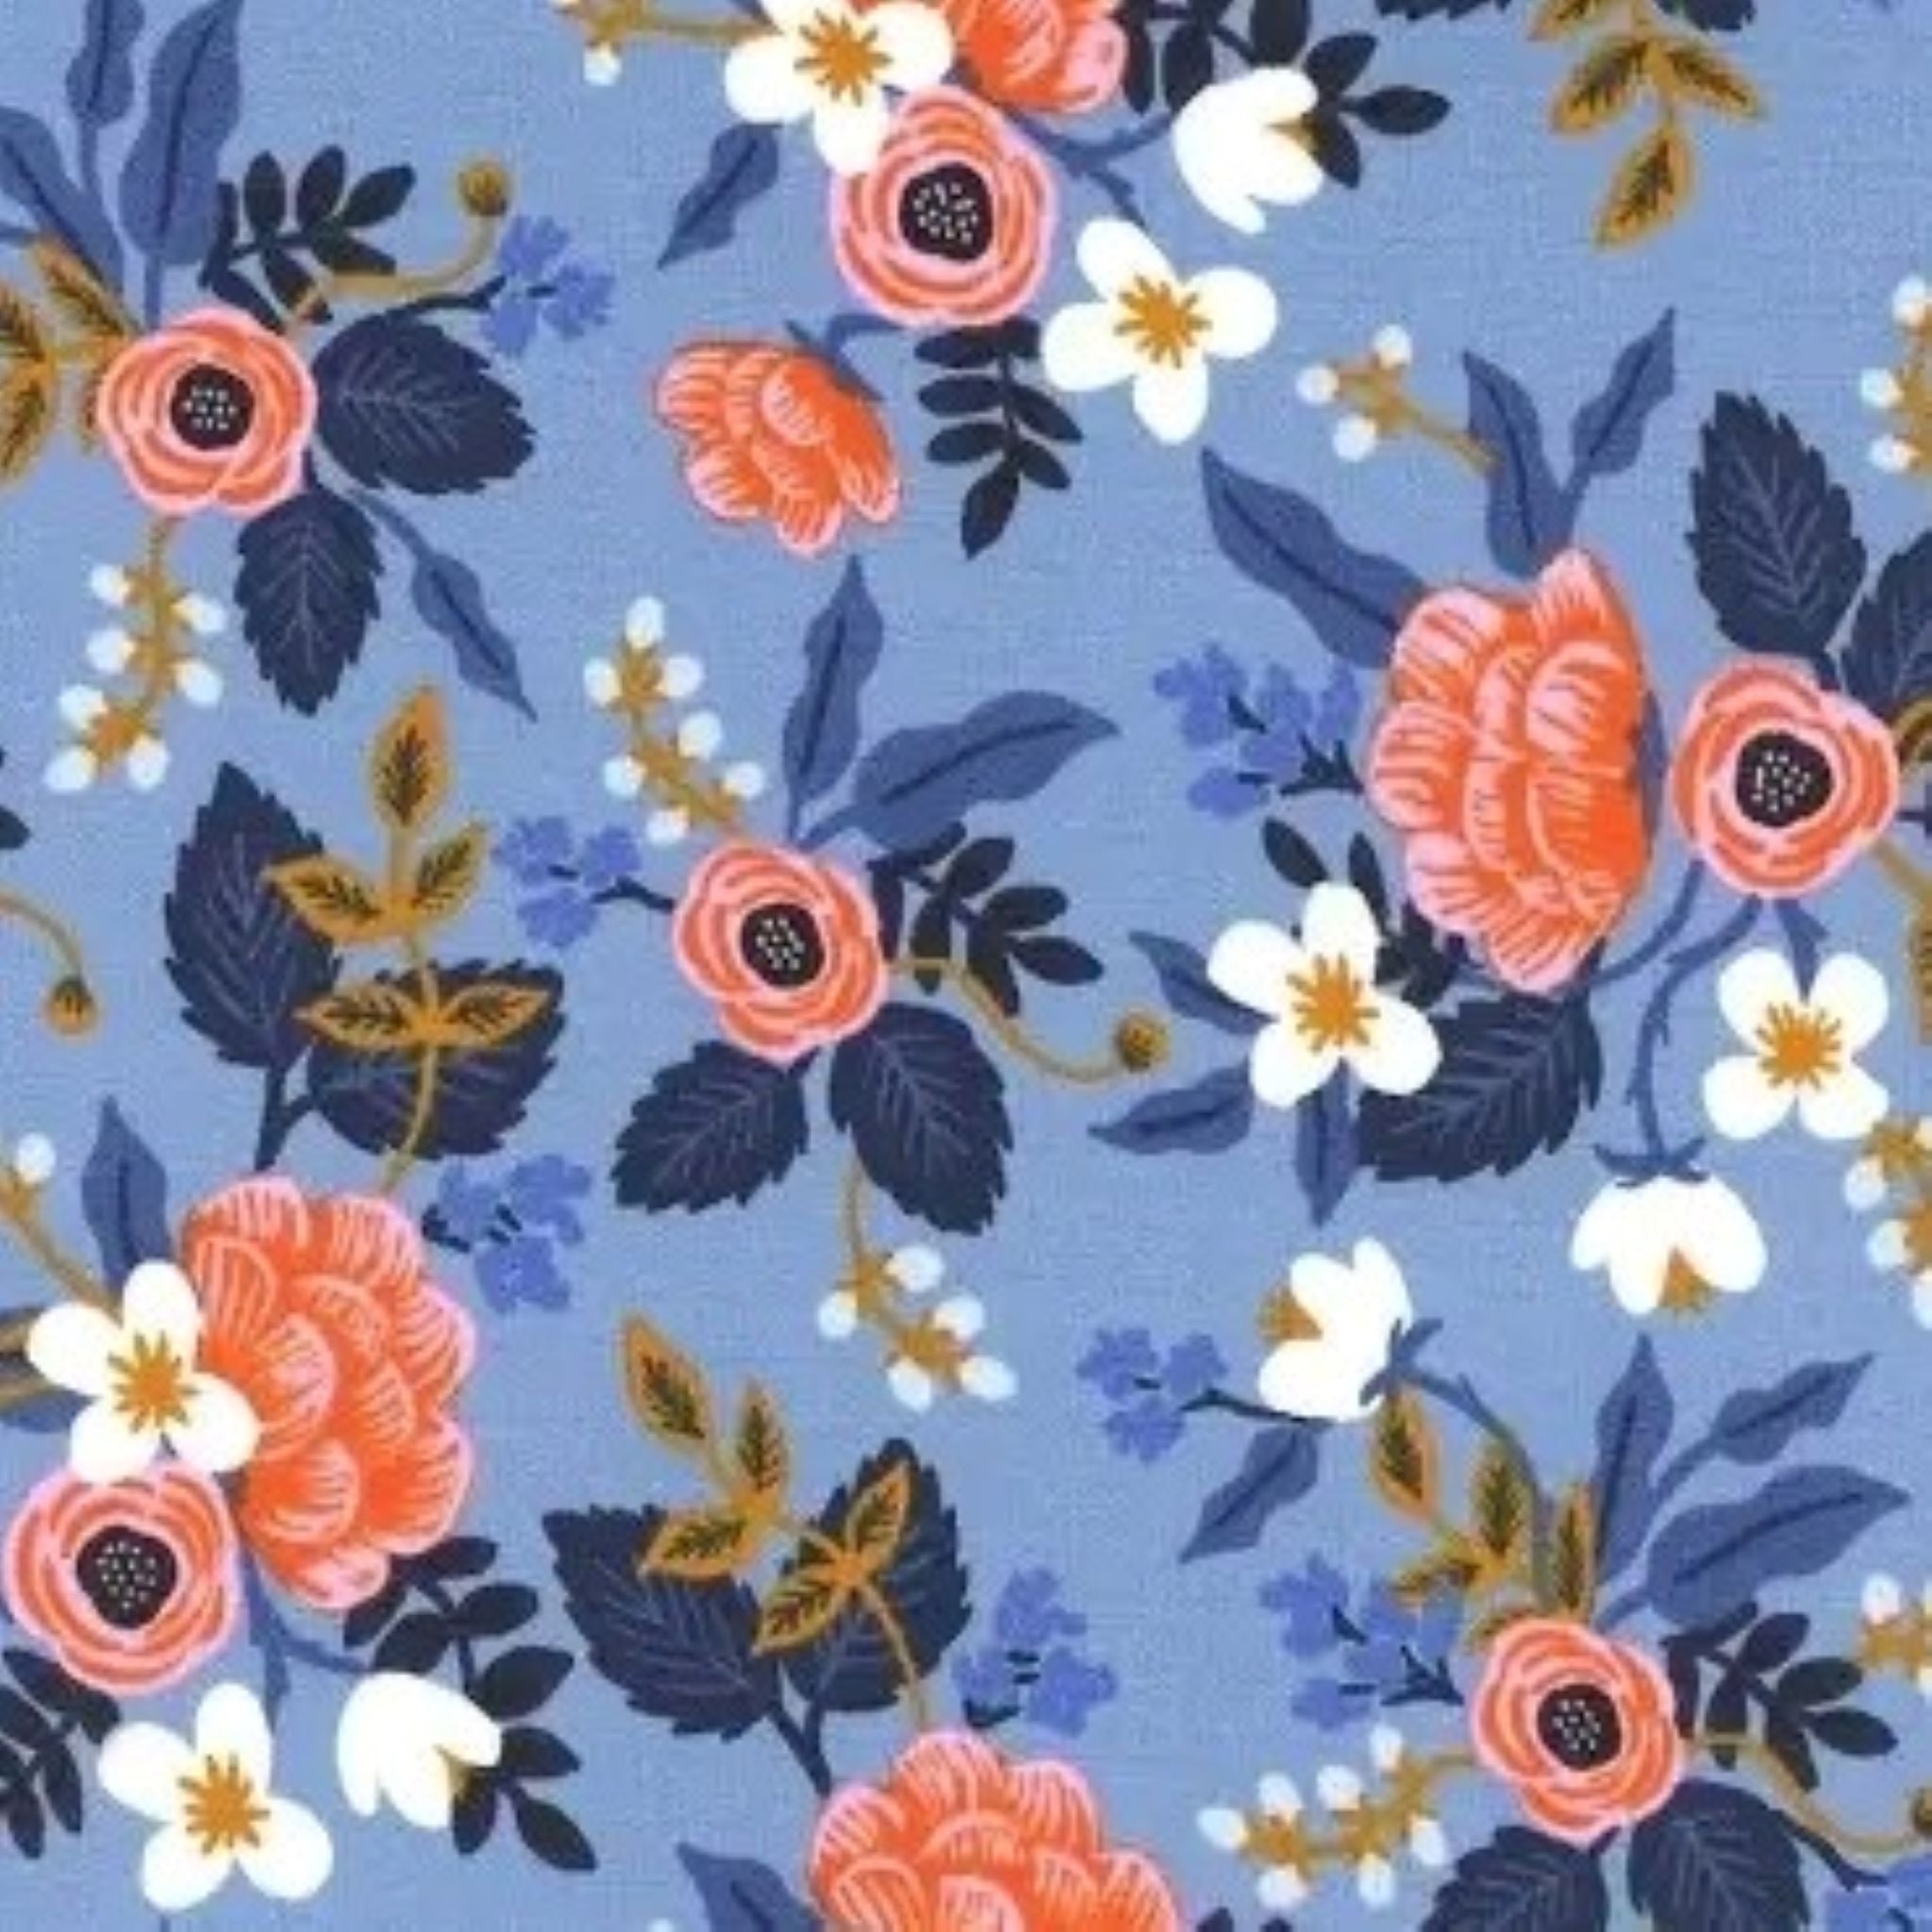 Rifle Paper Co Les Fleurs Birch Periwinkle Cotton Quilting Fabric - MookyPookyandMuffin